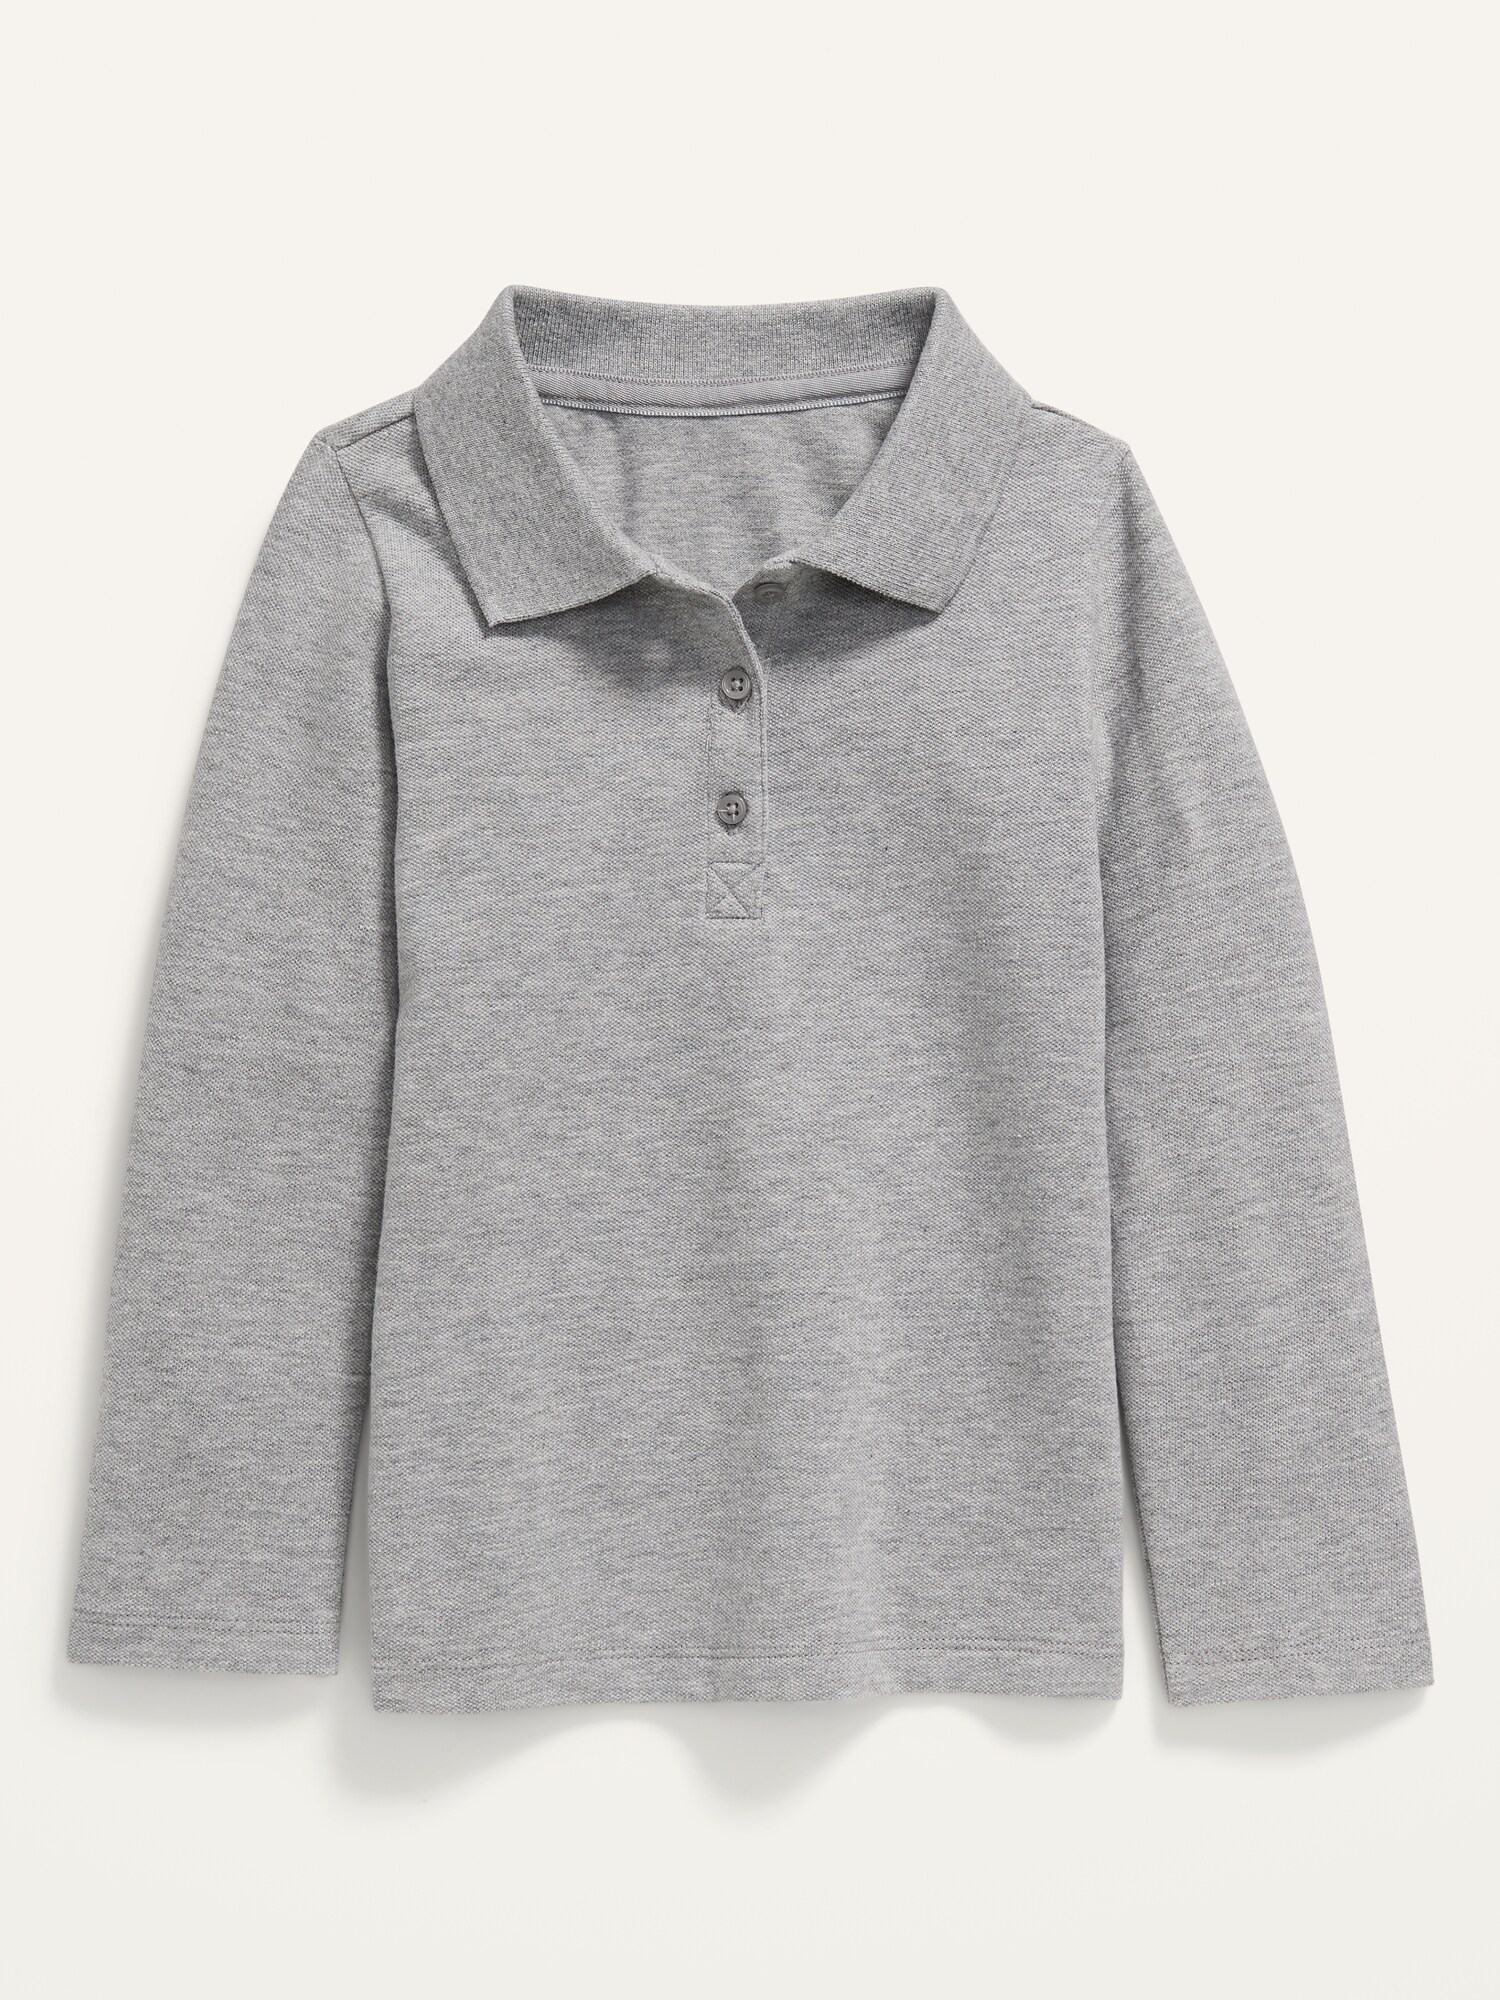 Uniform Long-Sleeve Pique Polo for Toddler Girls | Old Navy